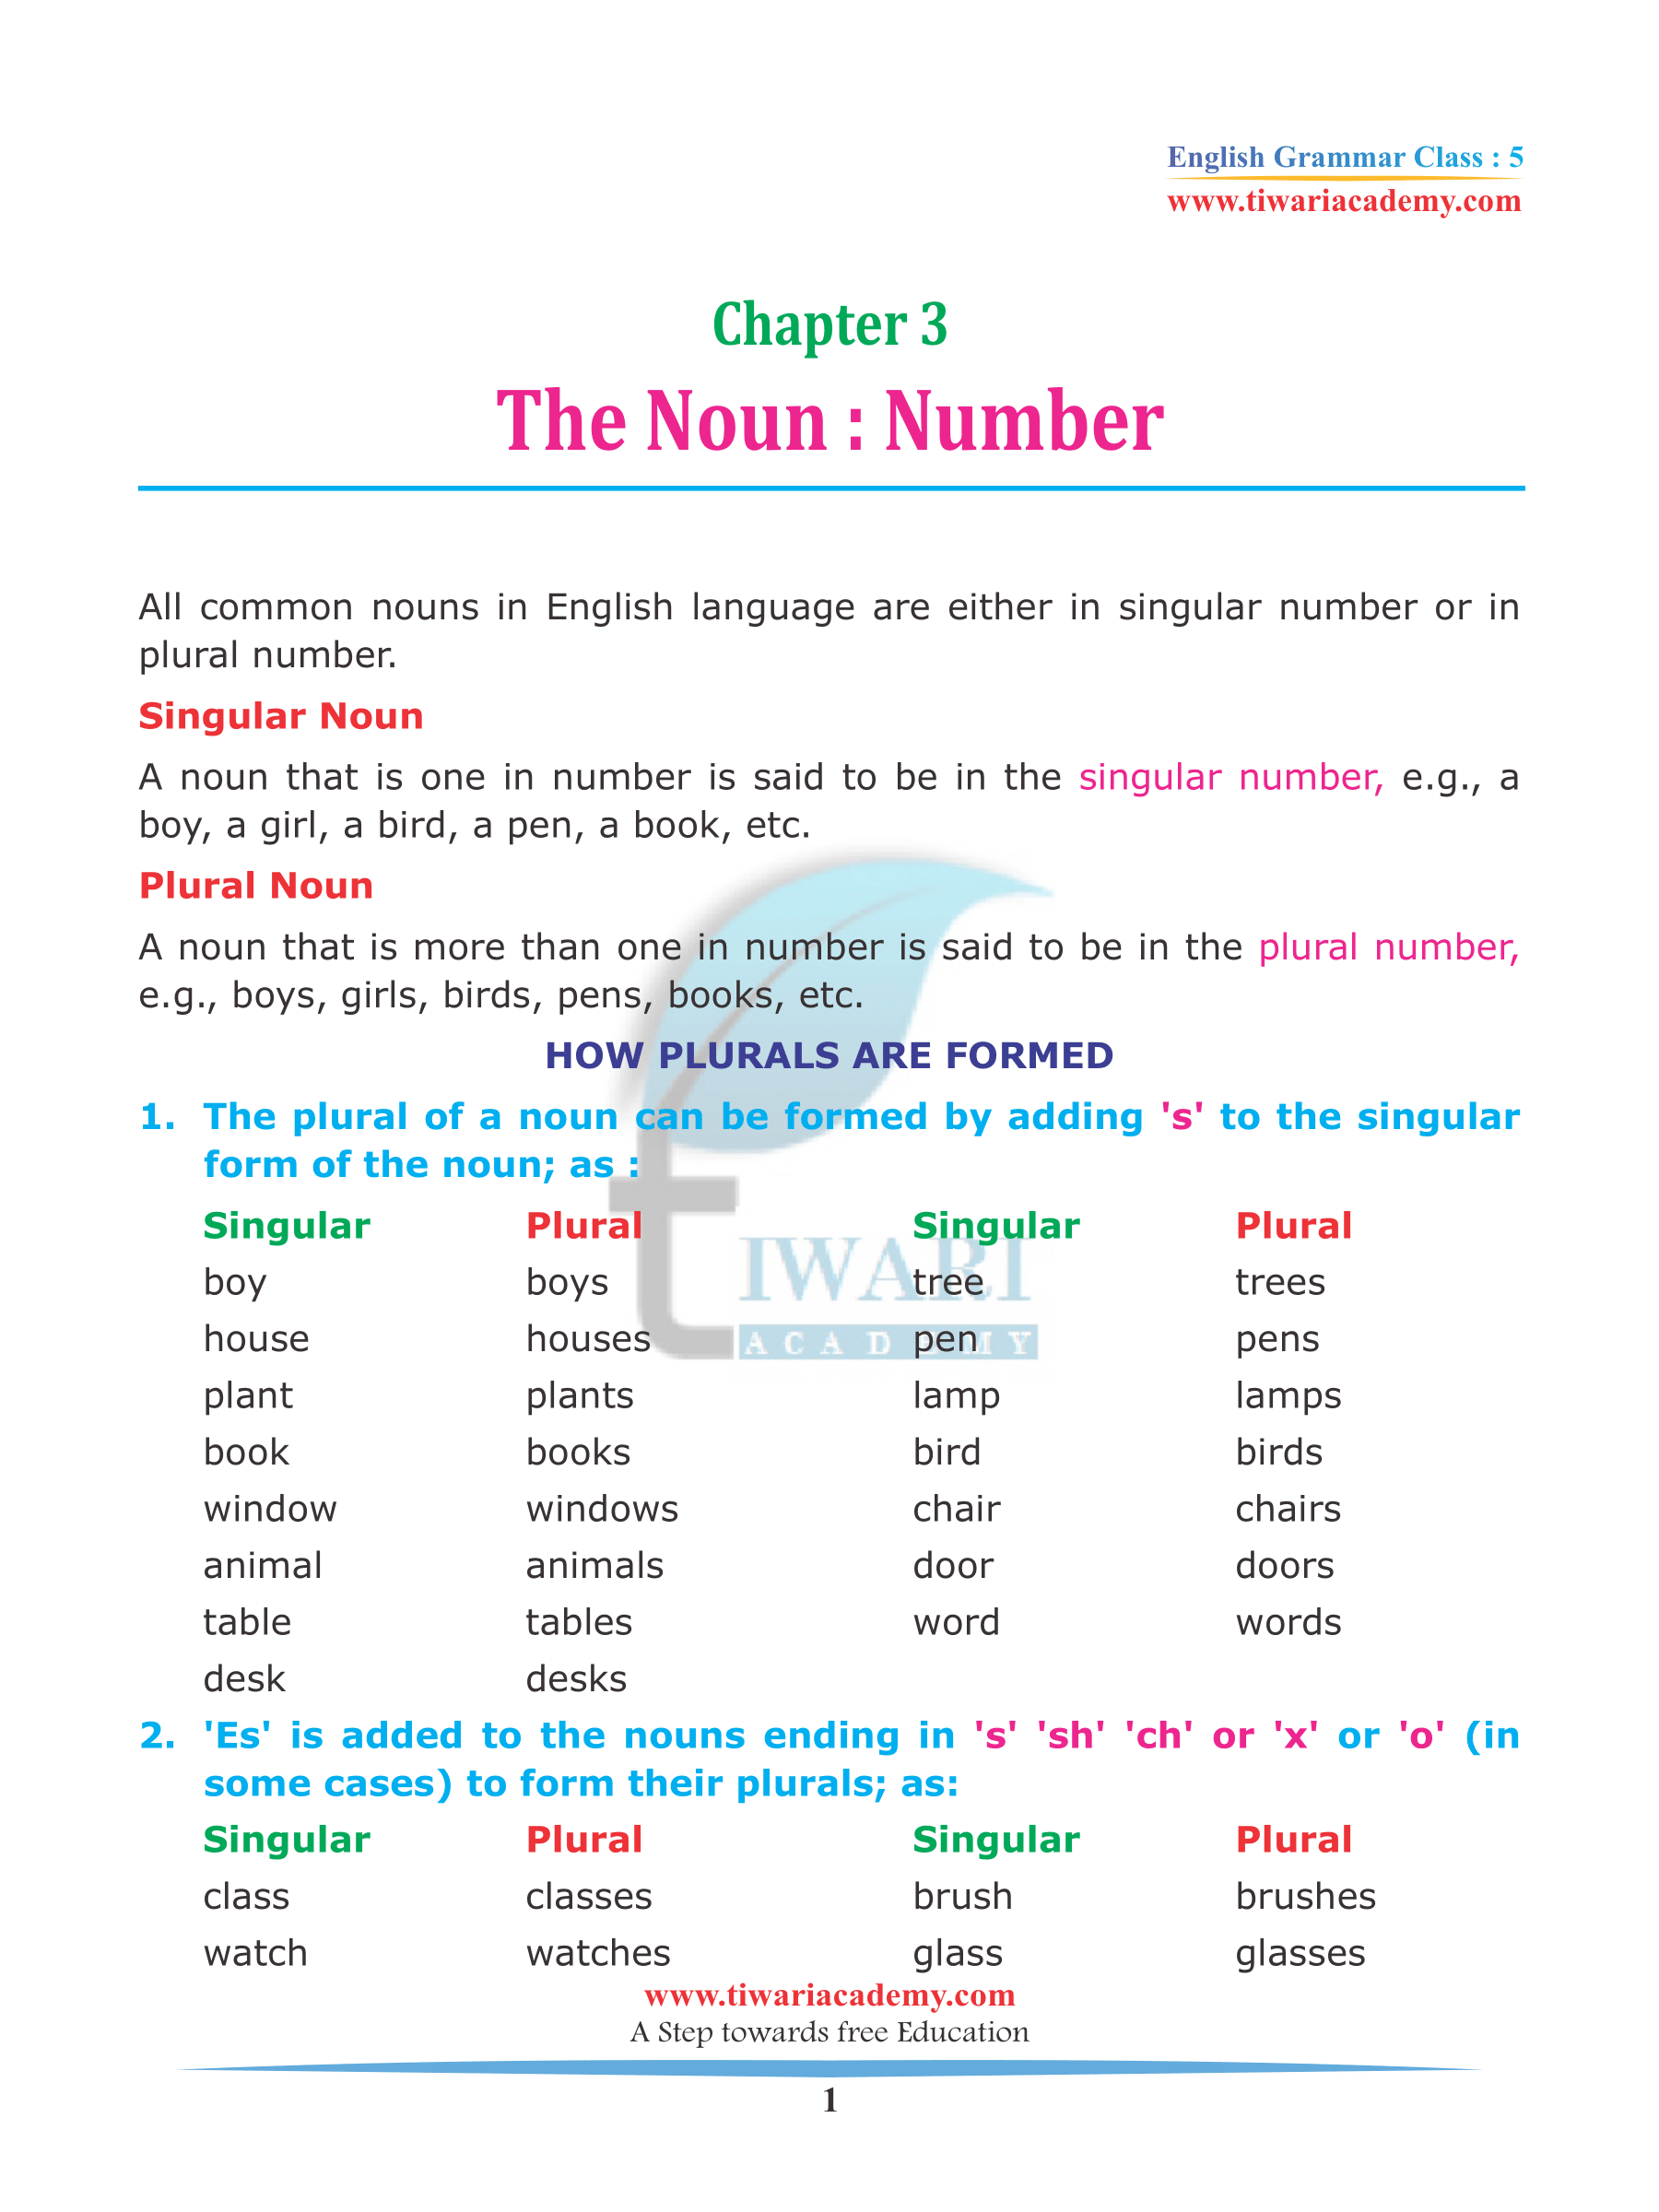 NCERT Solutions for Class 5 English Grammar Chapter 3 The Noun Number